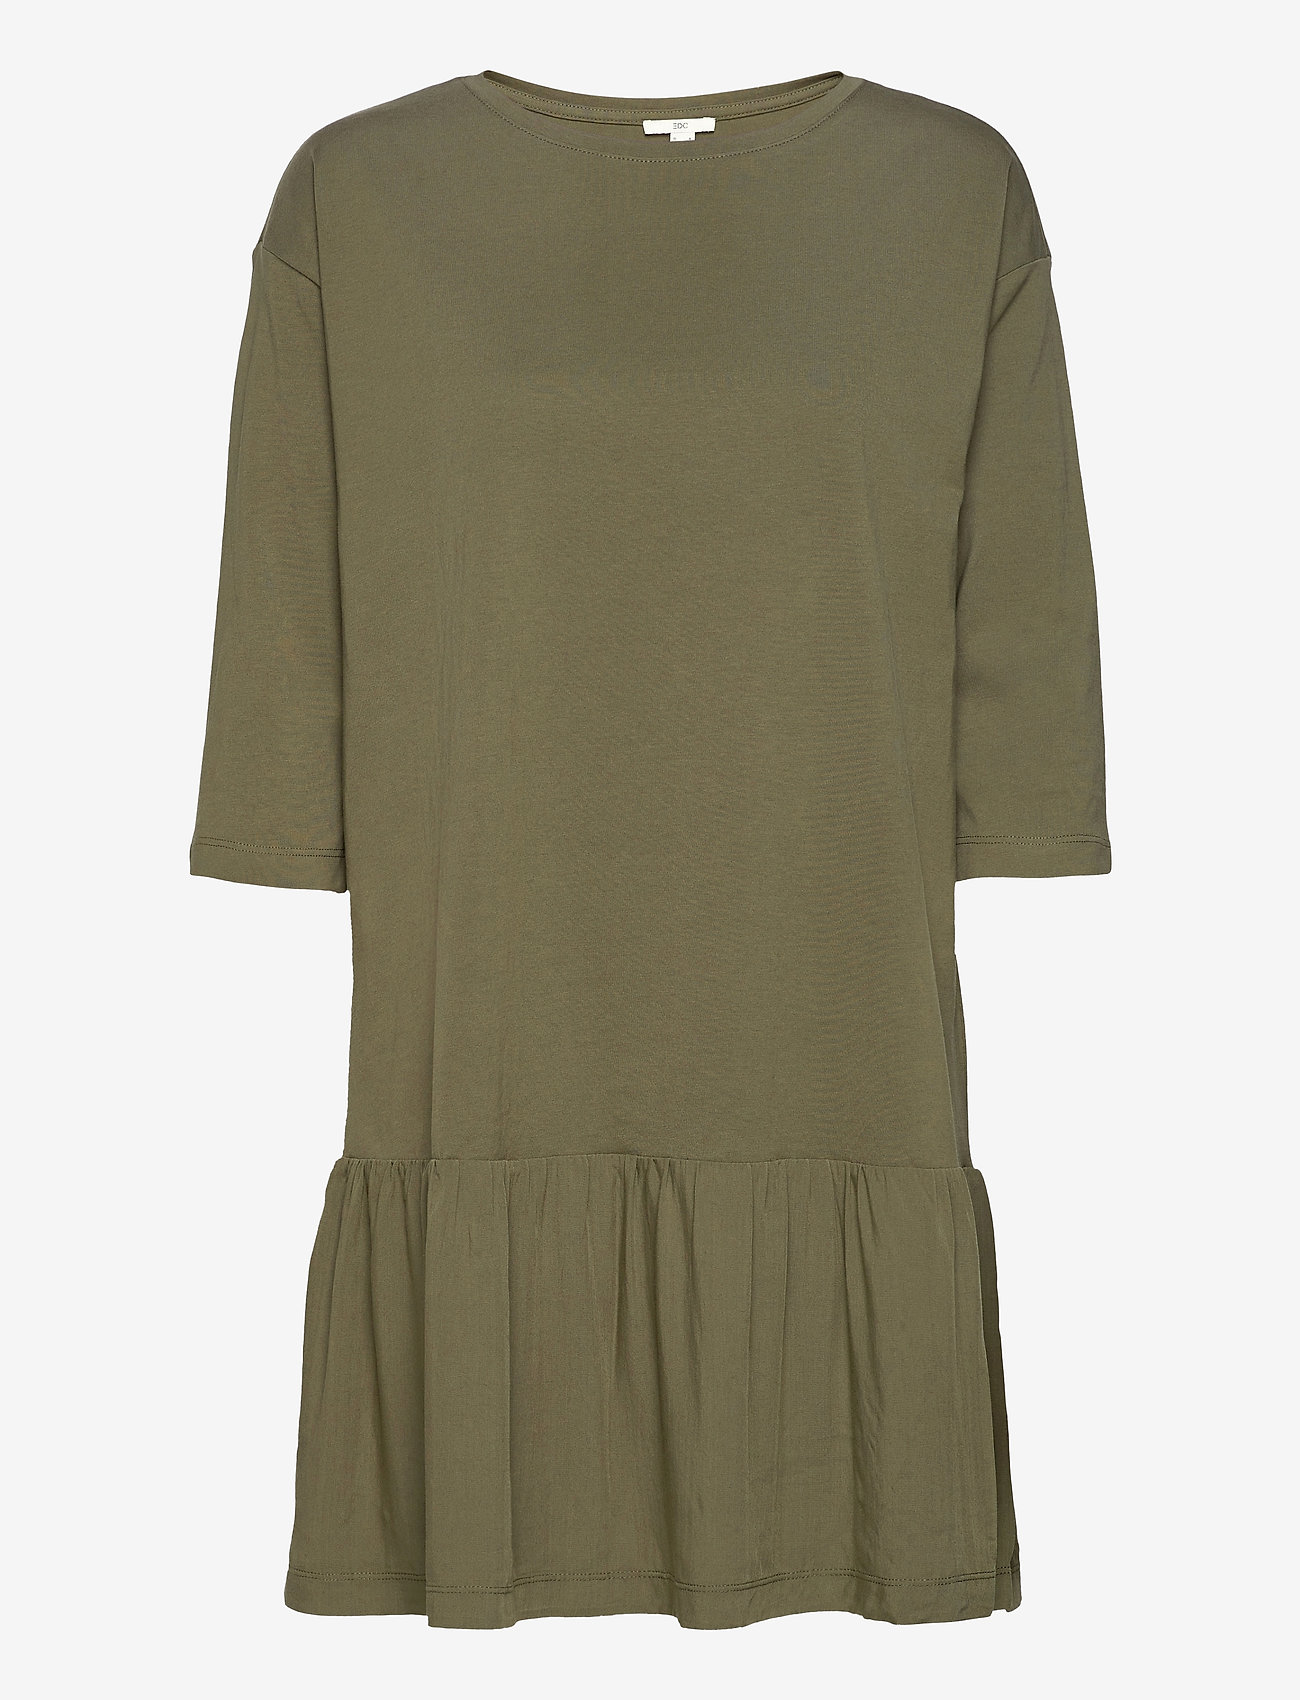 EDC by Esprit - Dresses knitted - lowest prices - khaki green - 0